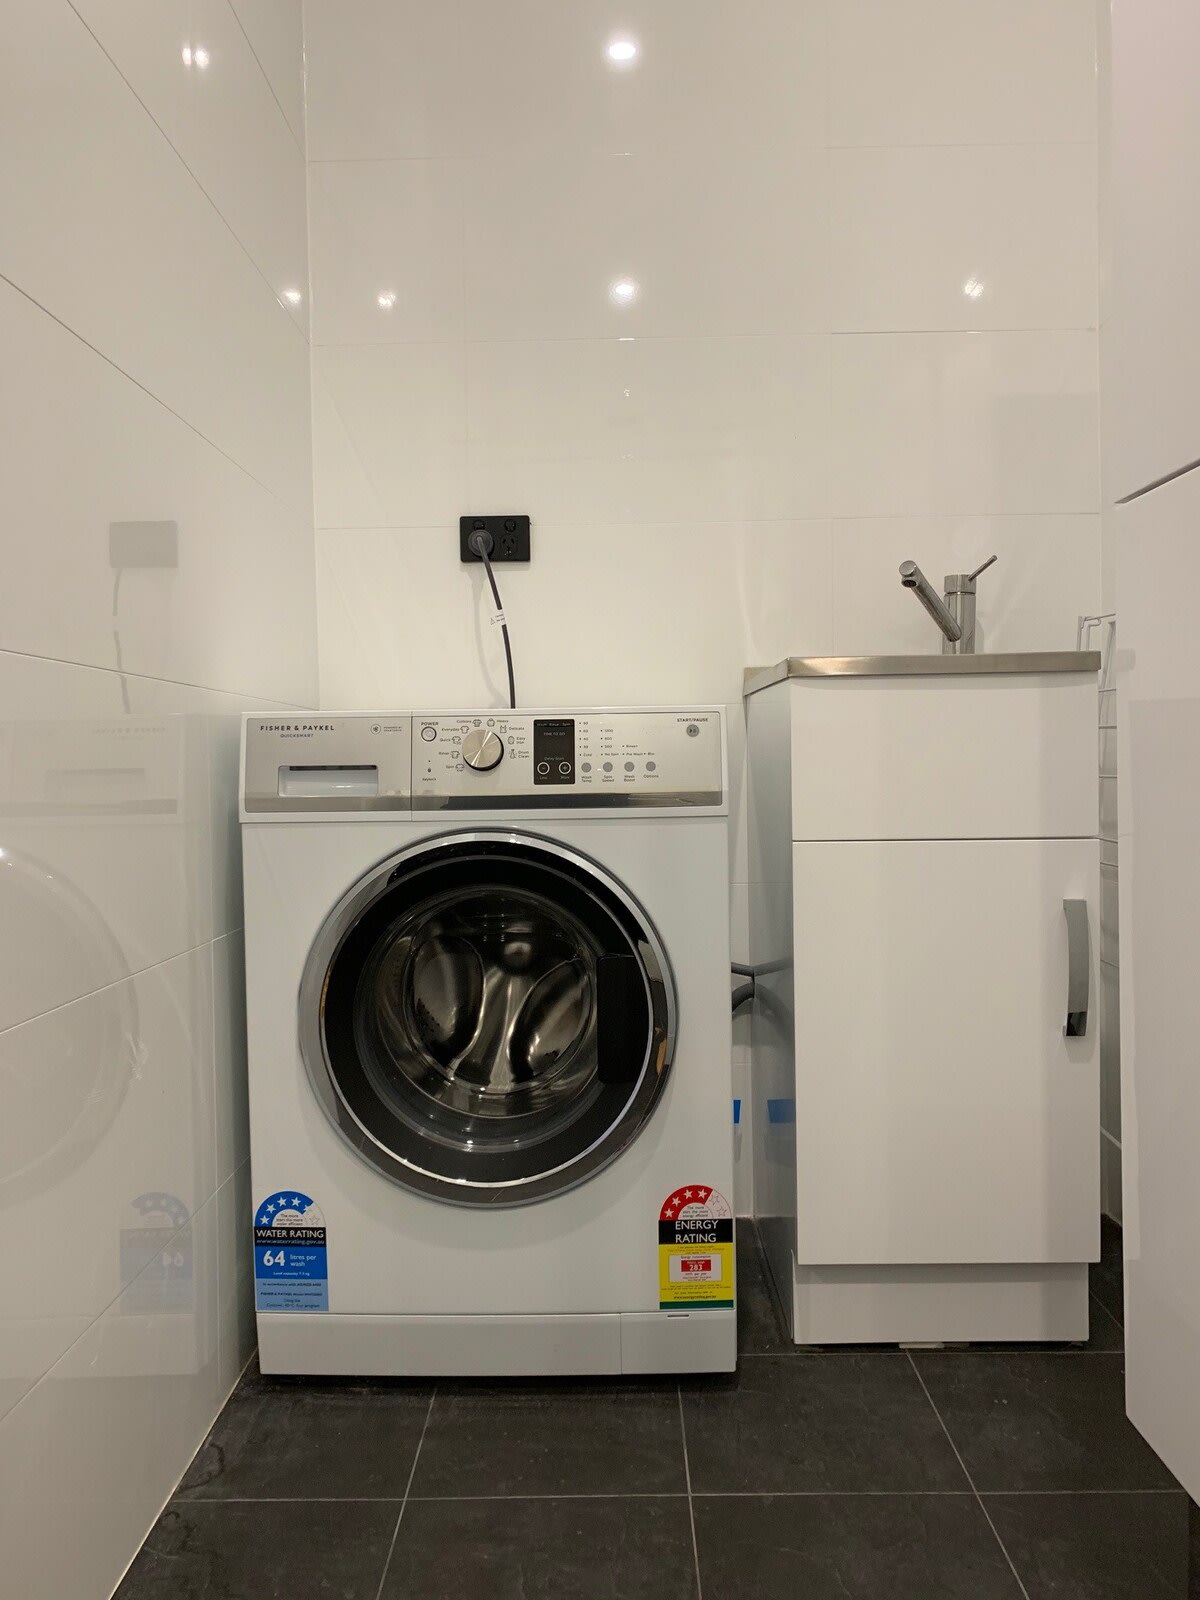 Washer and laundry area